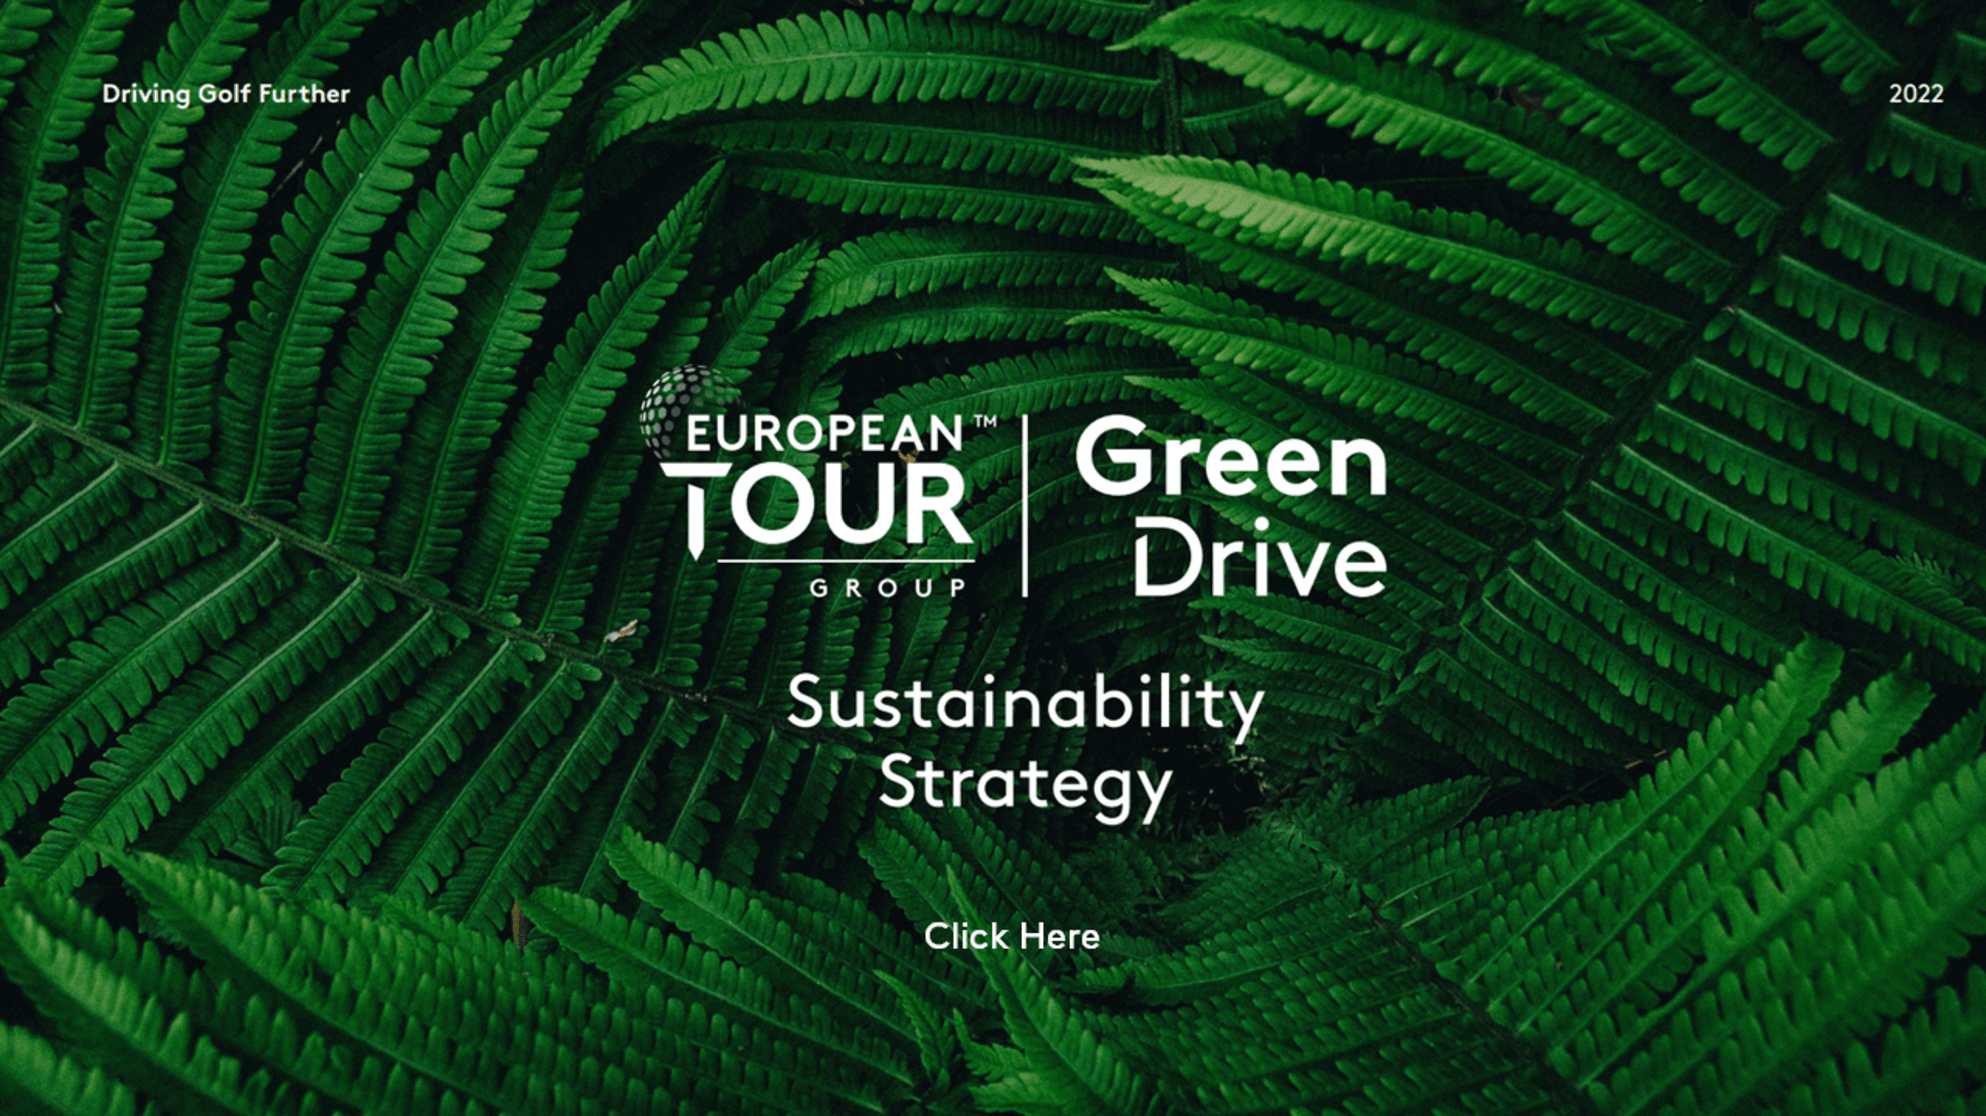 The European Tour Group has become the first professional golf tour to sign up for the Race to Zero climate action pledge ©DP World Tour